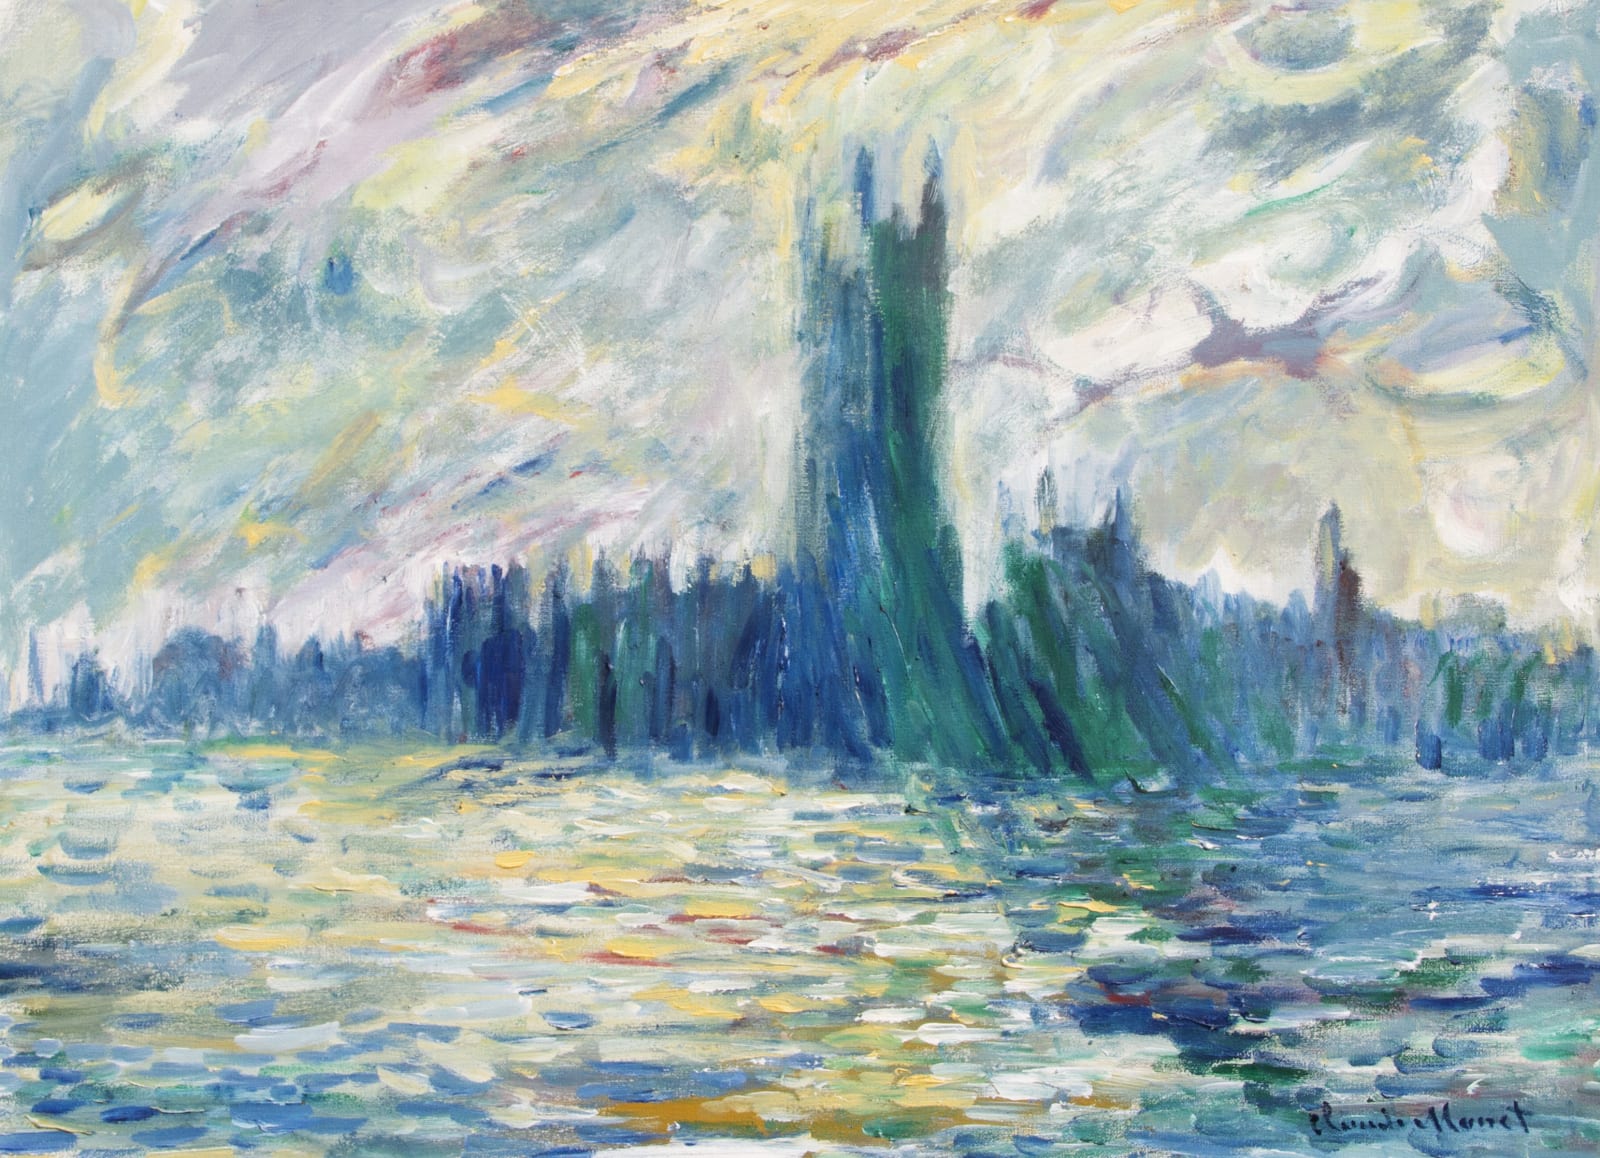 RICHARD GOWER, In The Manner Of Monet, Houses of Parliament